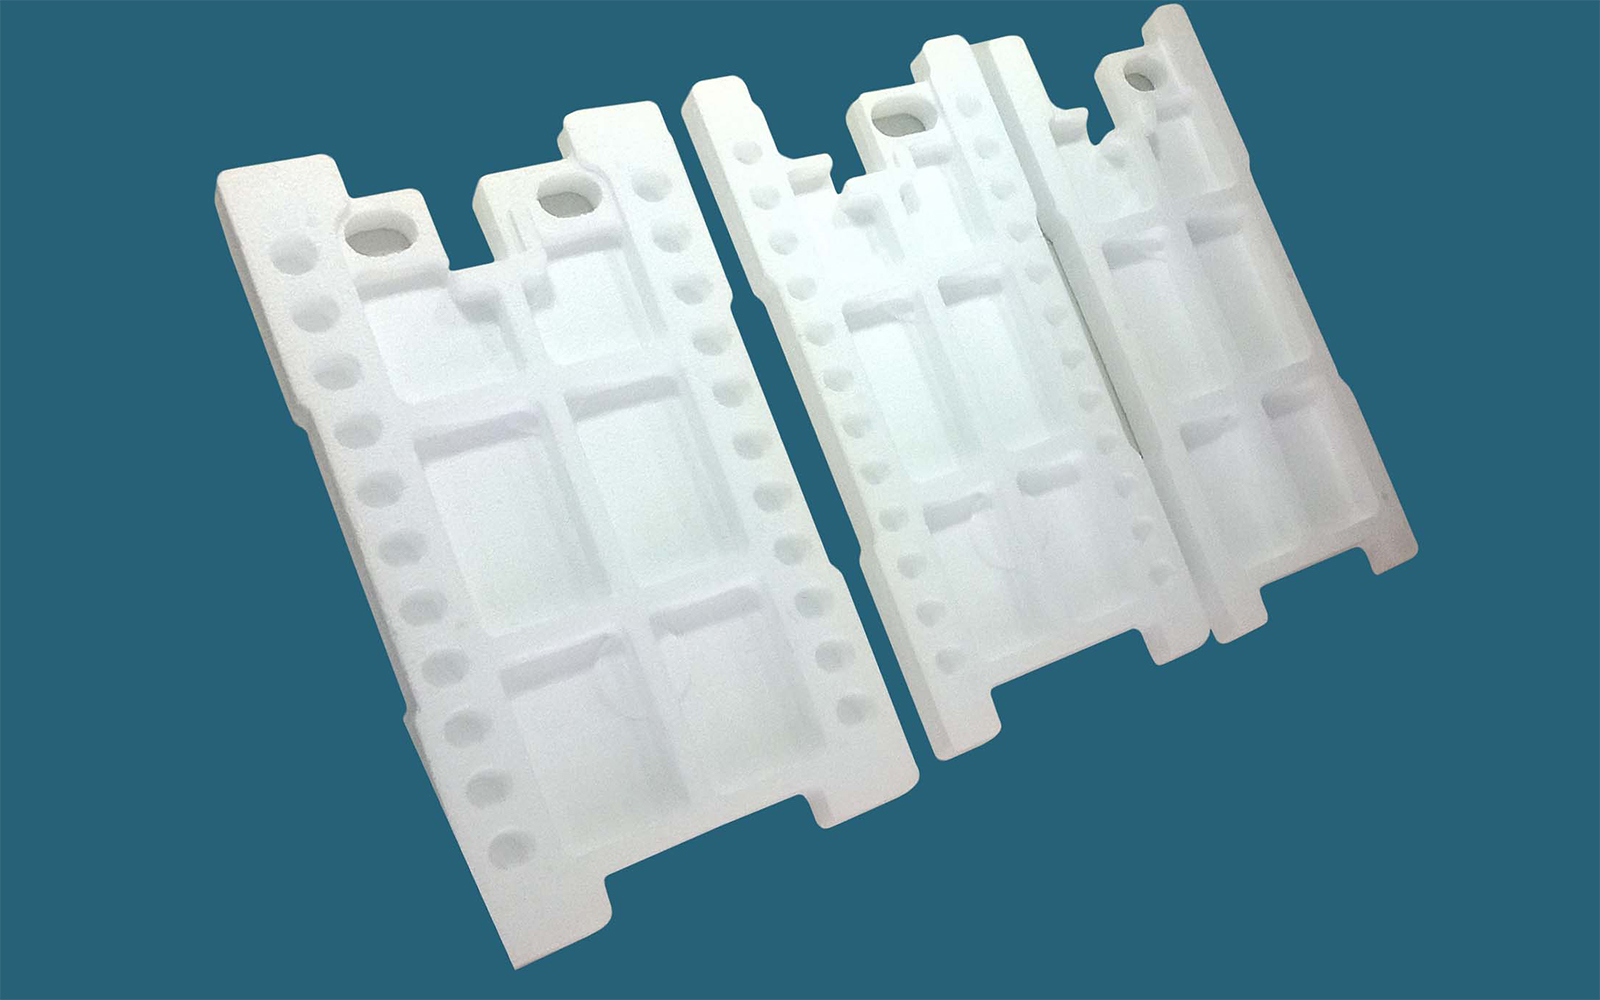 Expanded polystyrene (EPS) is an extremely efficient material in its simplicity.